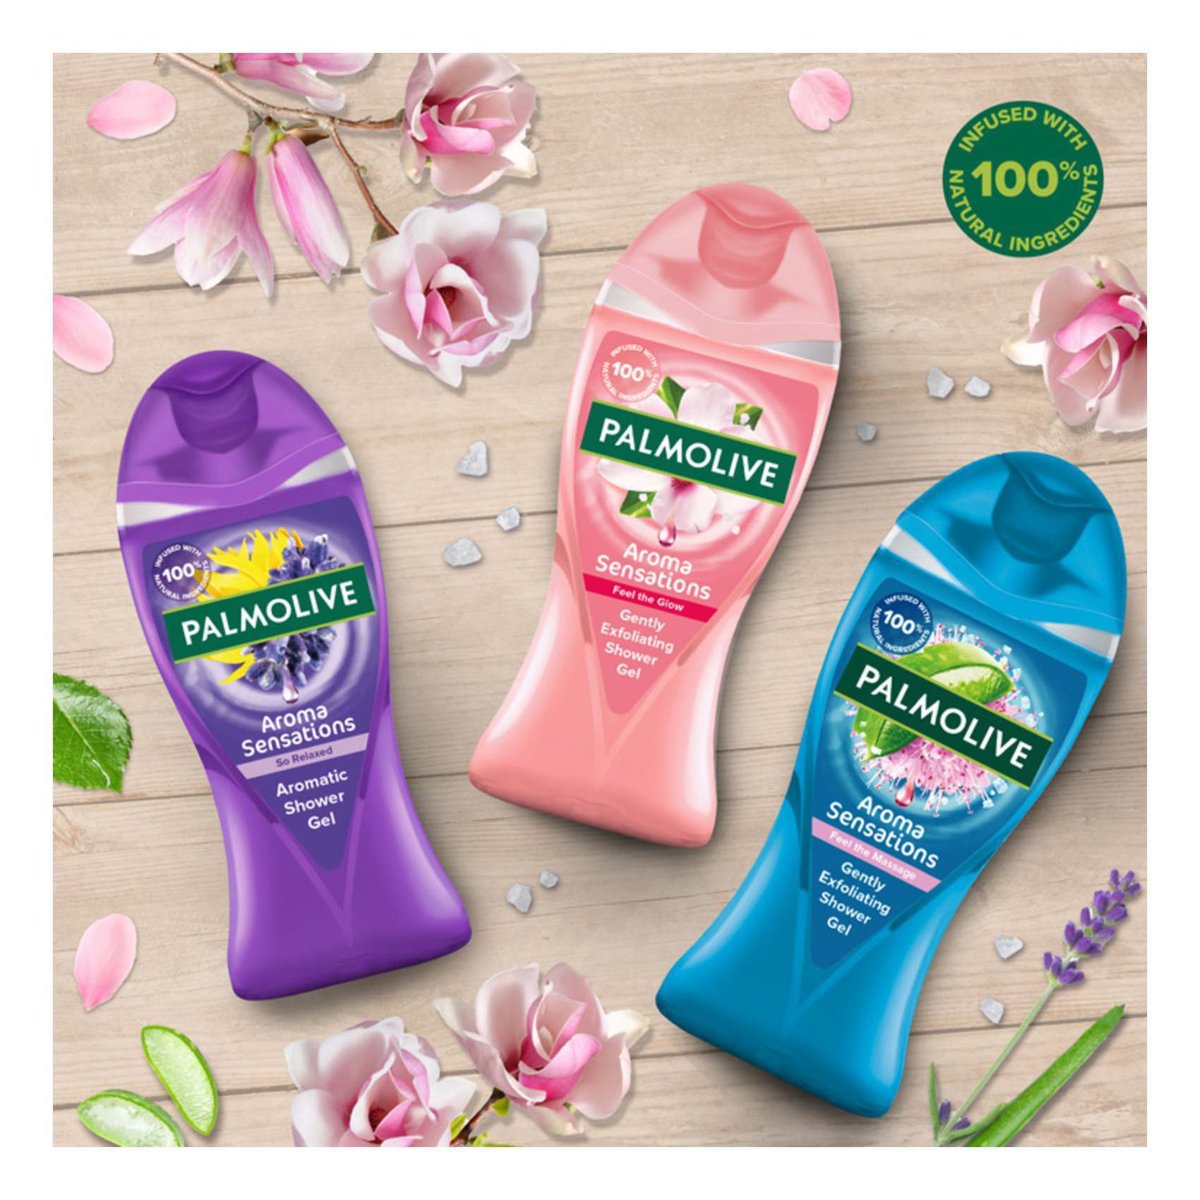 Palmolive Aroma Sensations Feel the Glow Shower Gel Value Pack 2 x 250 ml